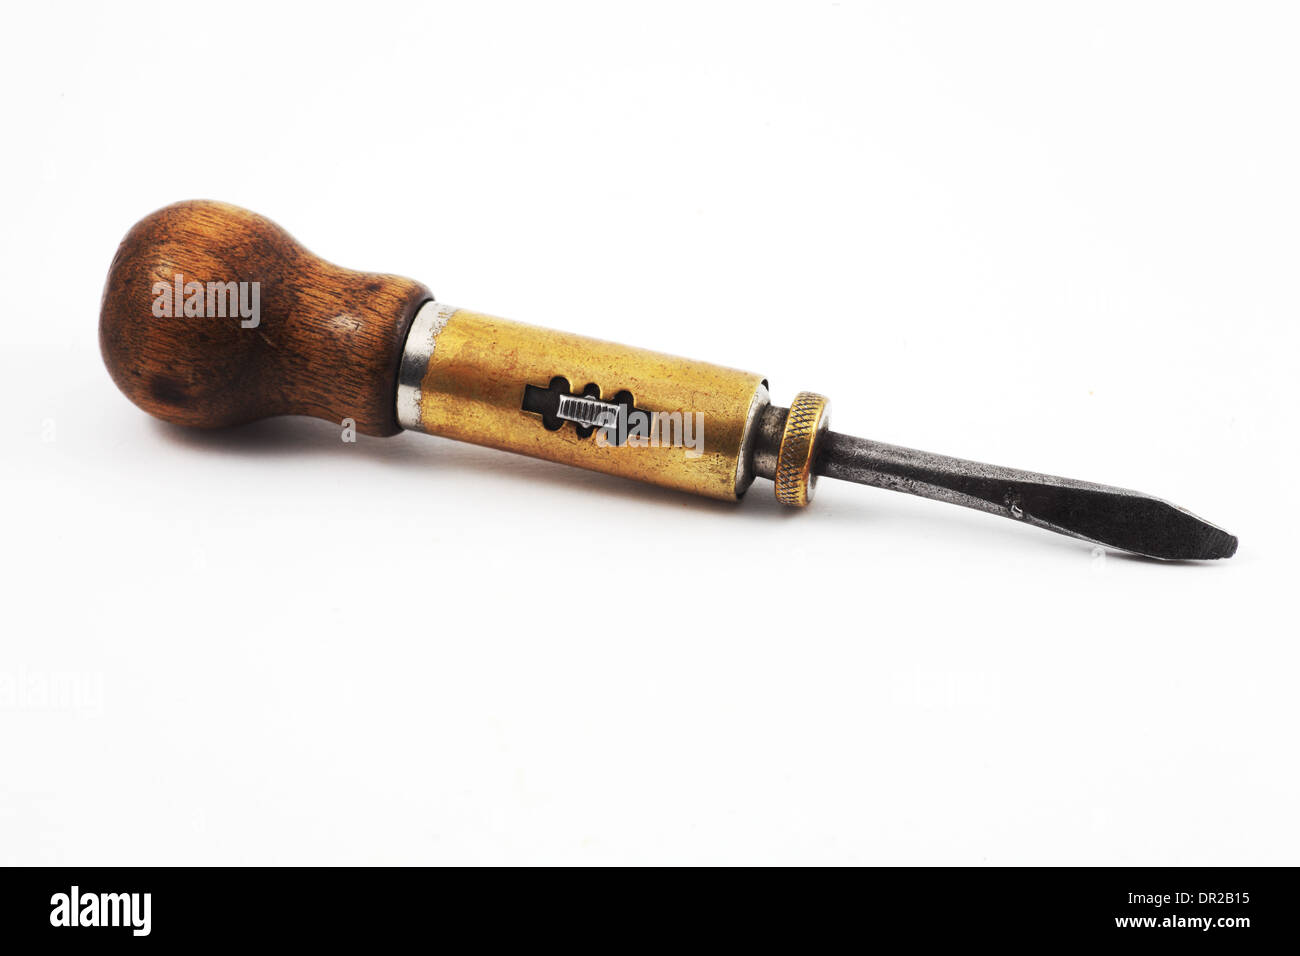 vintage old screwdriver with a mechanism on white background Stock Photo